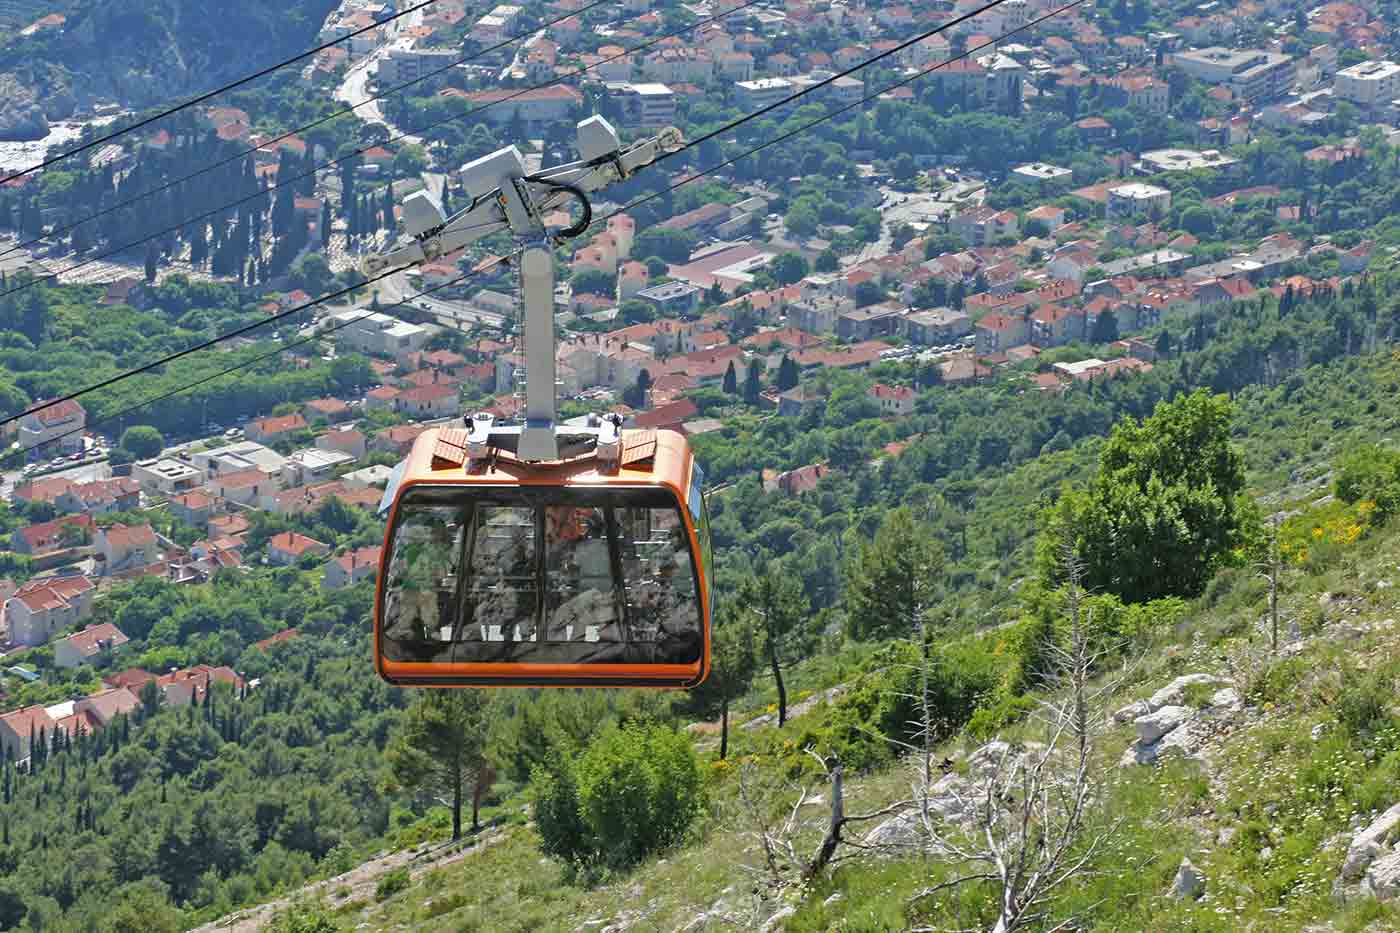 Dubrovnik Cable Car